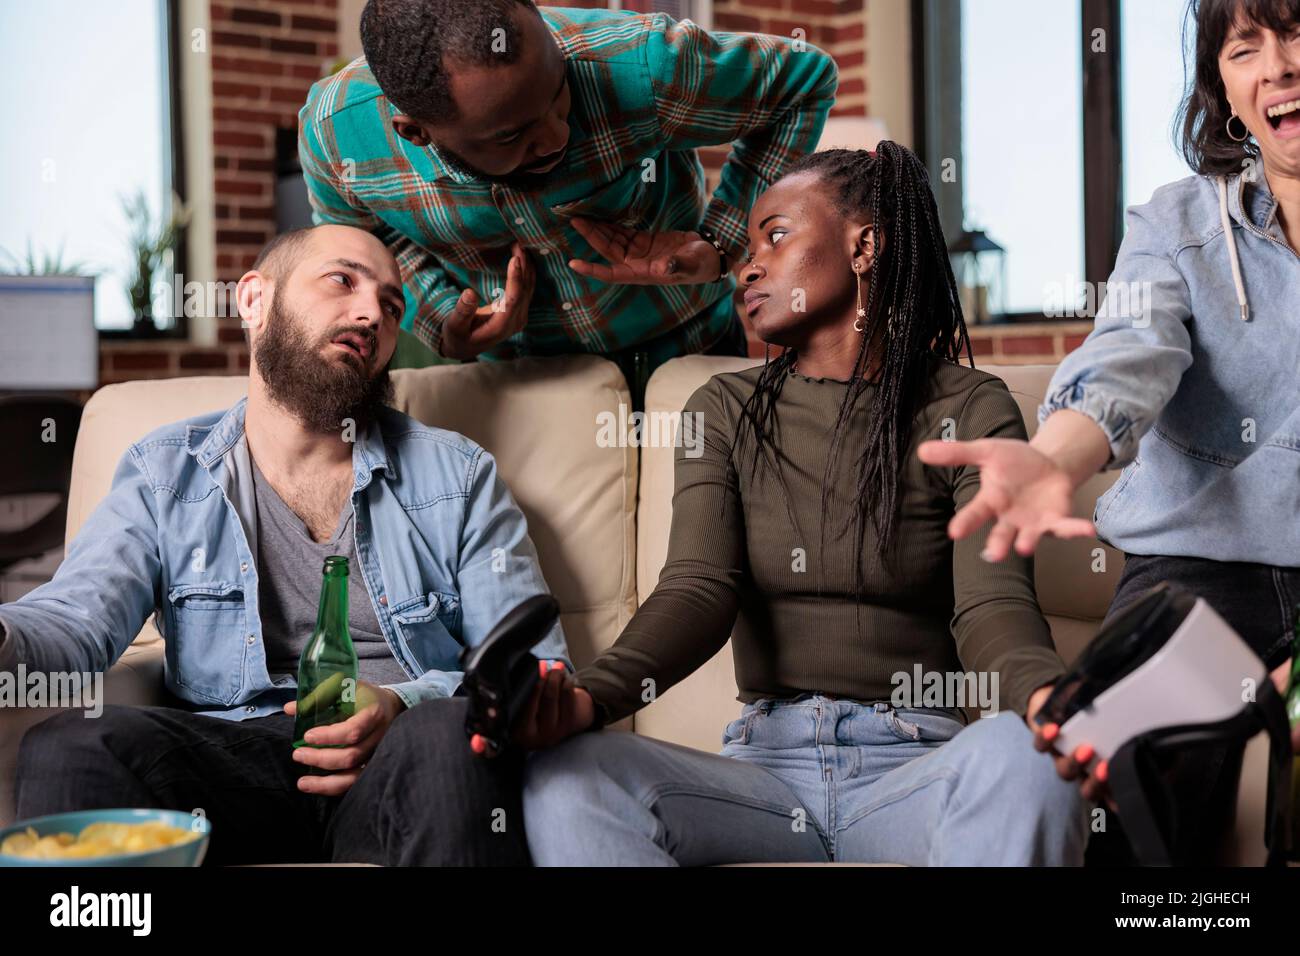 Multiethnic group of friends winning video games with vr goggles , feeling sad about lost competition with augmented reality glasses. Enjoying gathering with people together with alcoholic drinks. Stock Photo